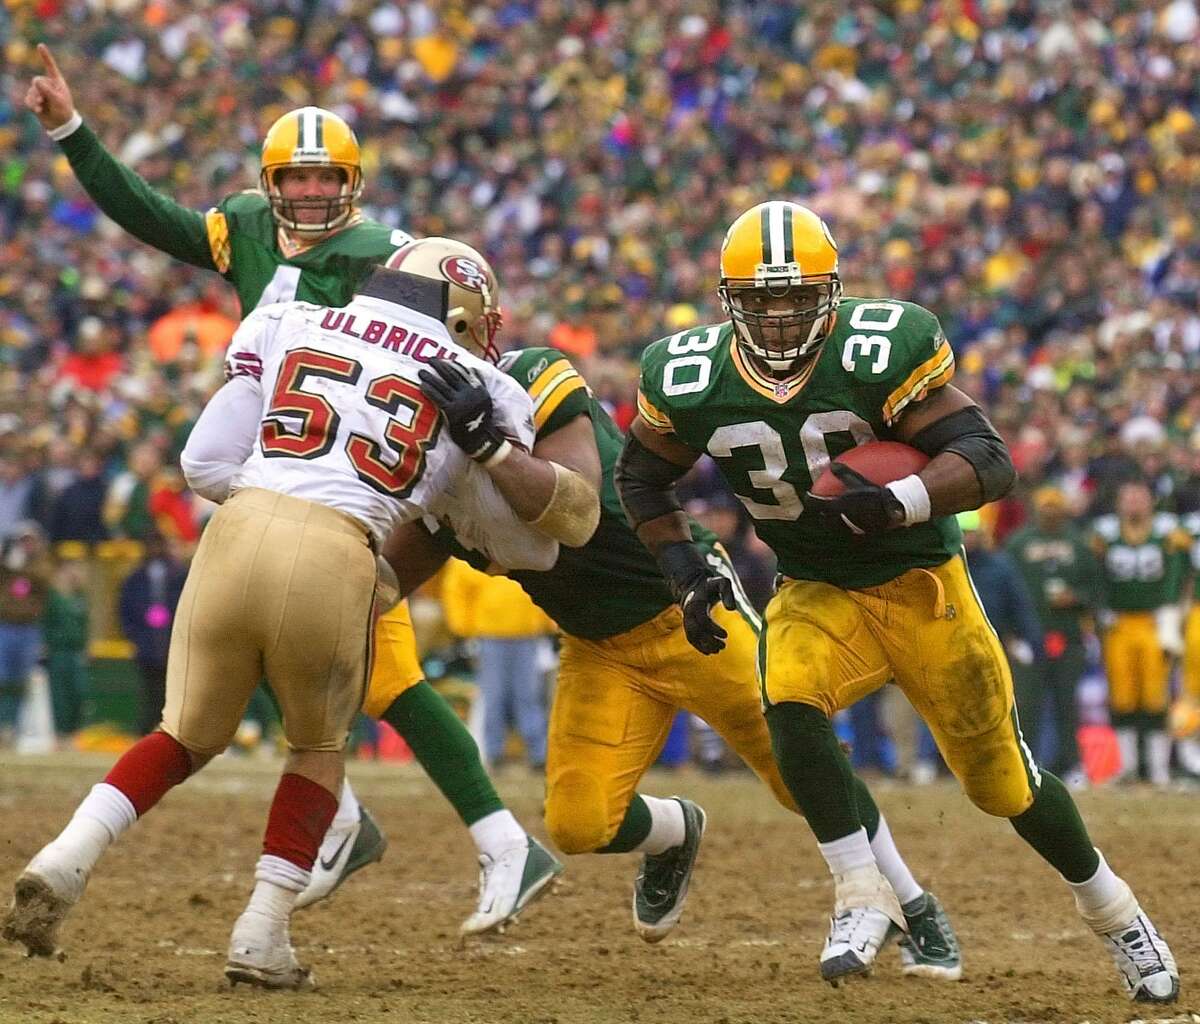 The Packers’ Ahman Green runs for a 9-yard TD as QB Brett Favre reacts in 2002 in Green Bay, Wis. The Packers won 25-15.